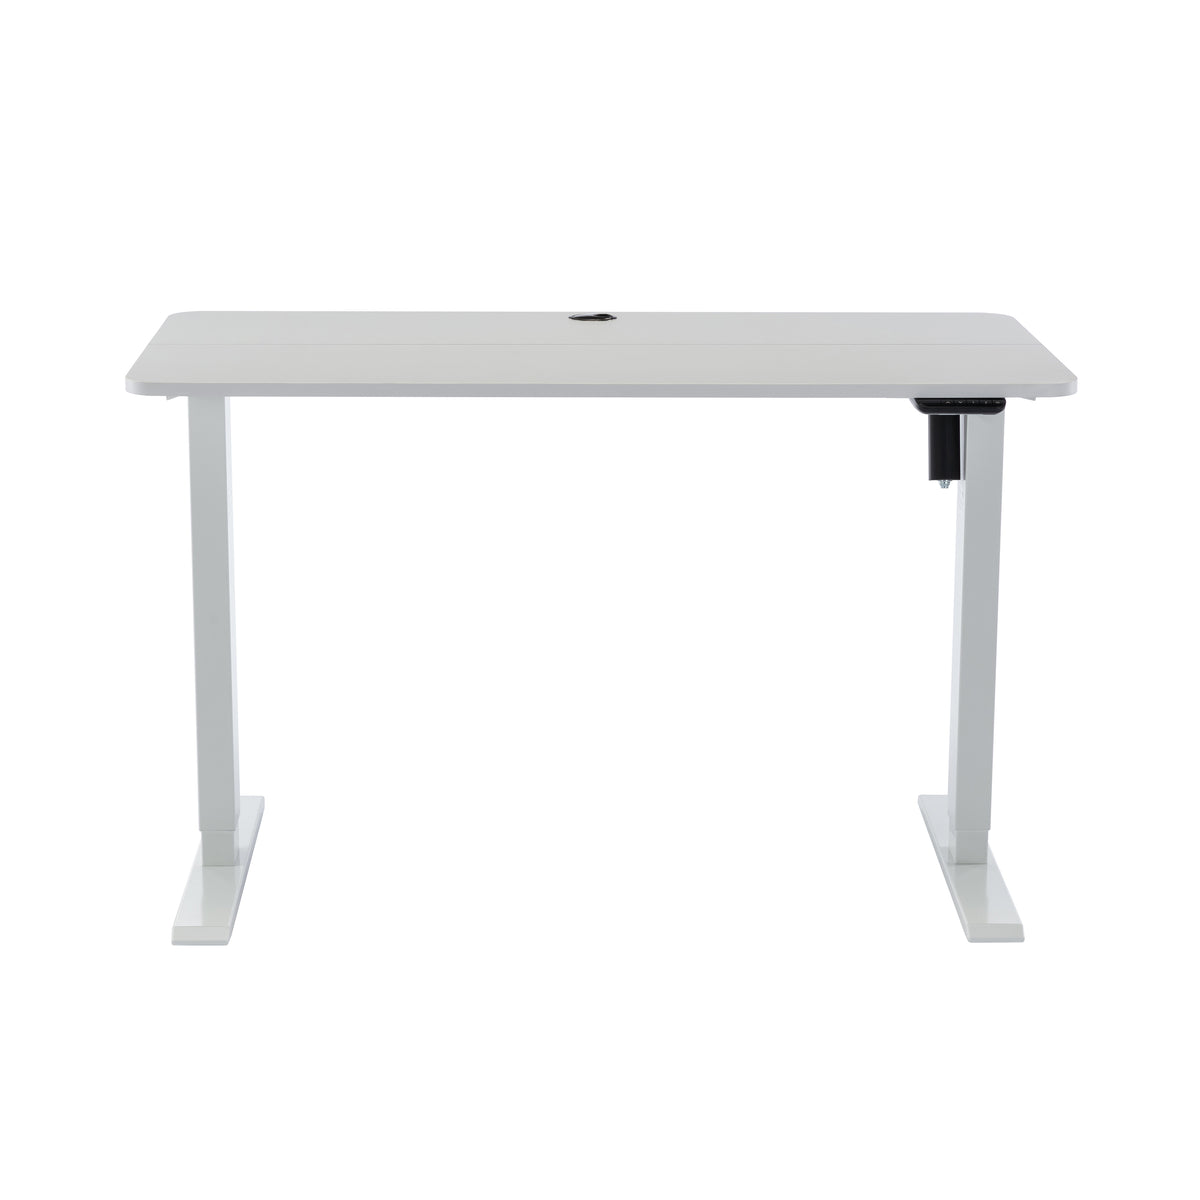 Sit & Stand Desk In White - 1.2m - Notbrand